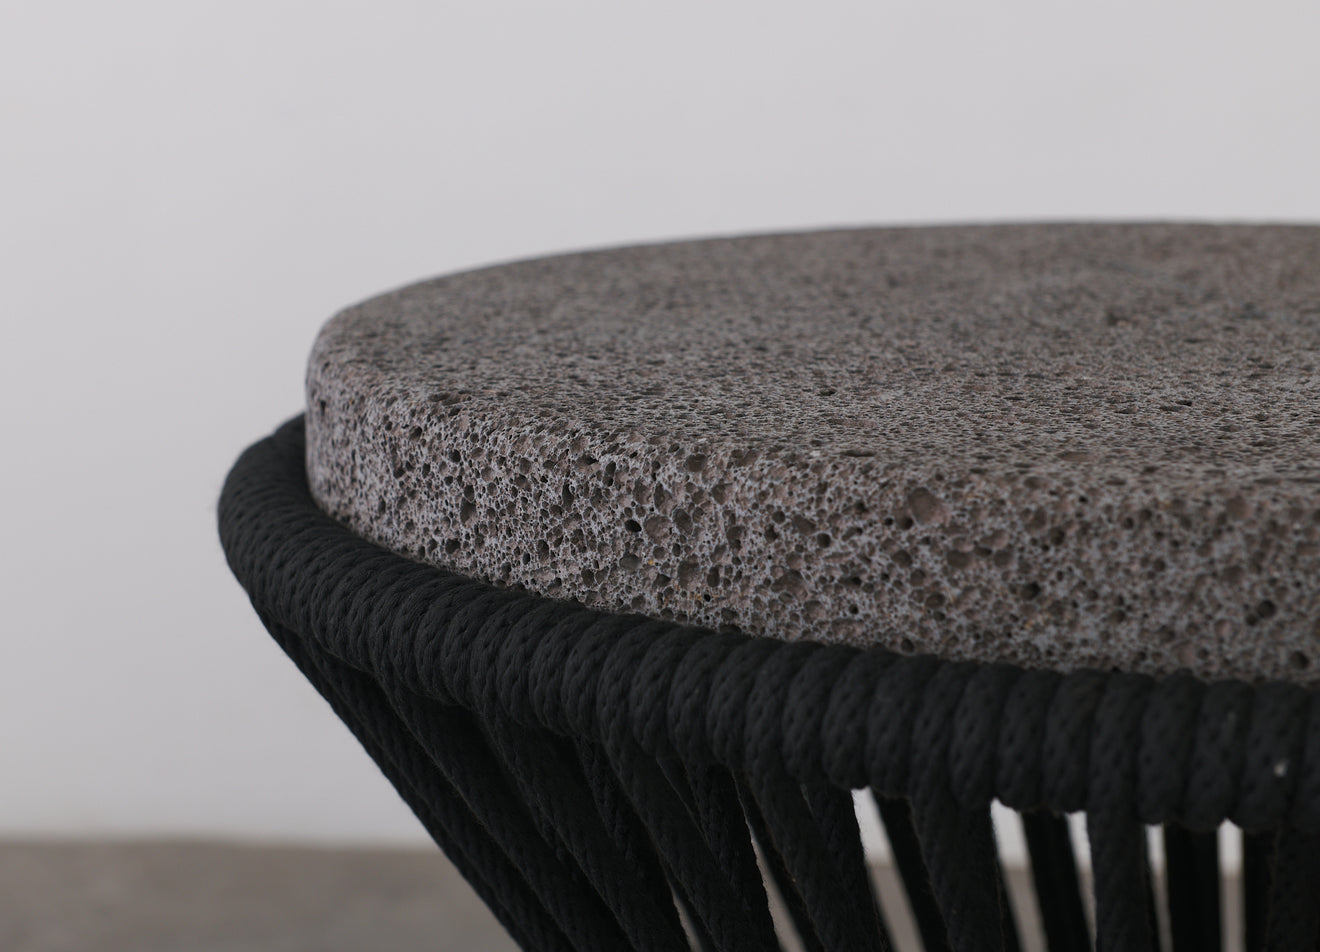 OUTDOOR ROUND TABLE WITH BASALT TOP BY LIKA MOORE